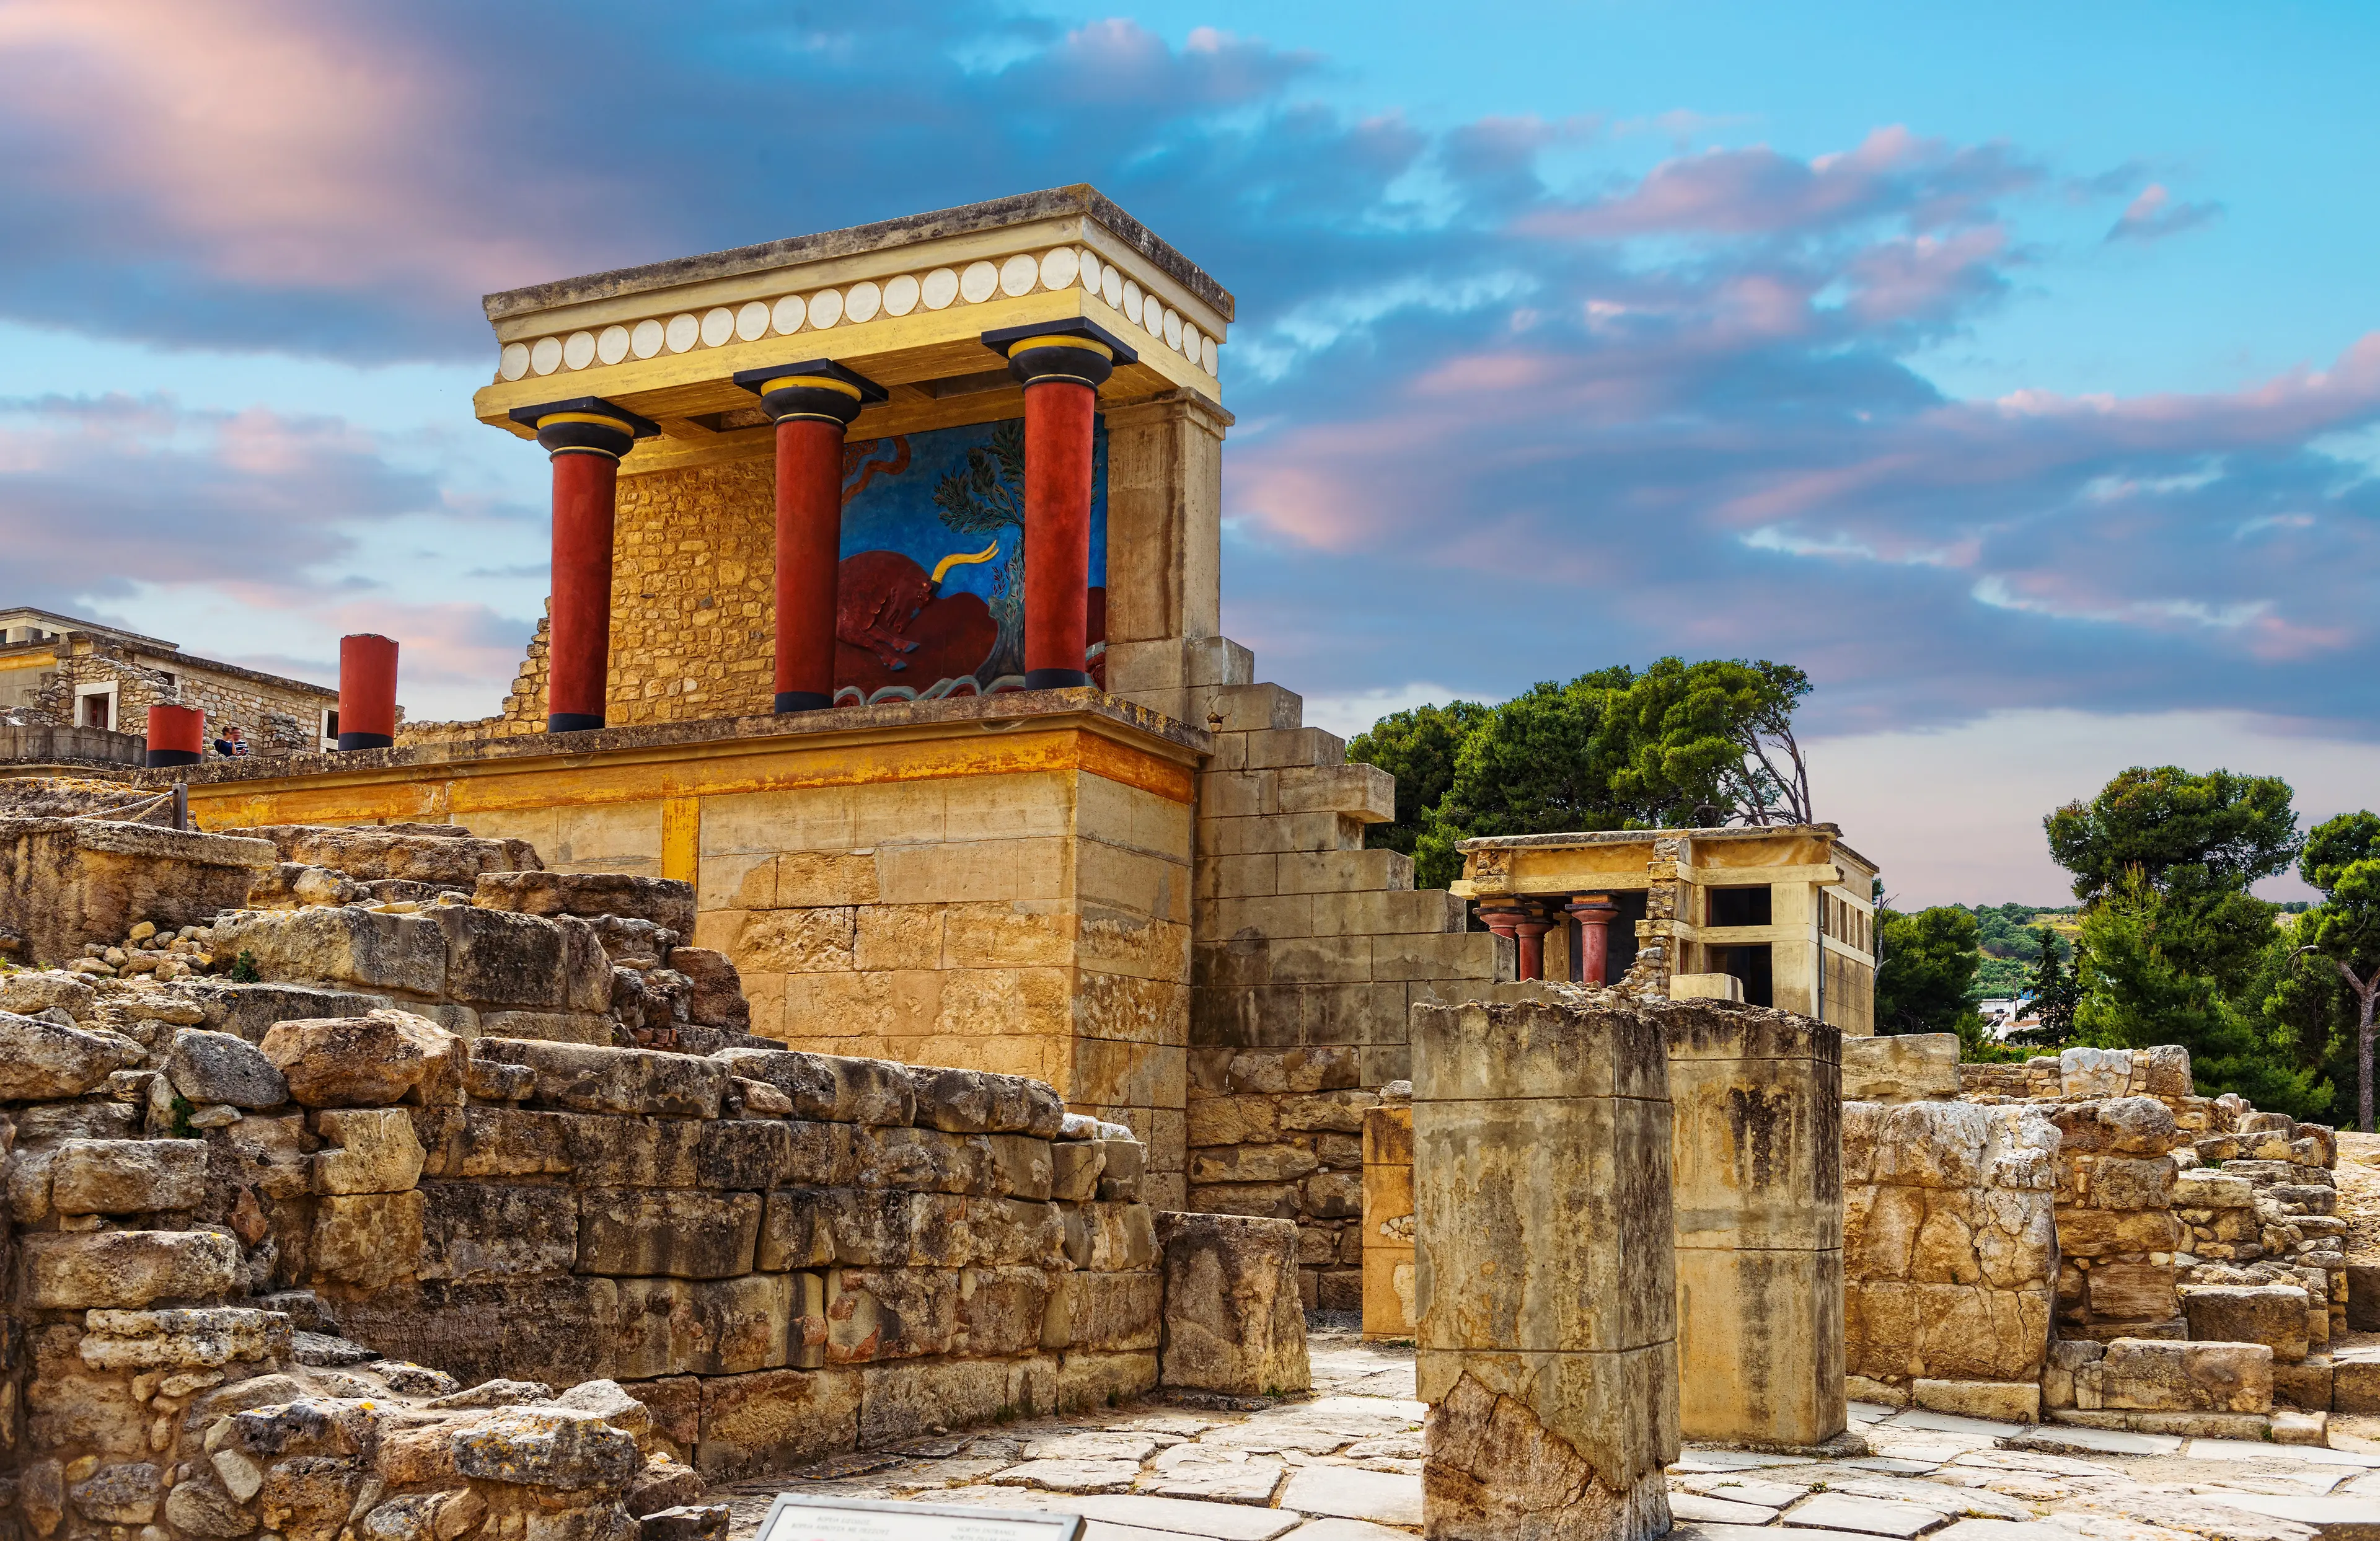 The Minoan ruins of Knossos